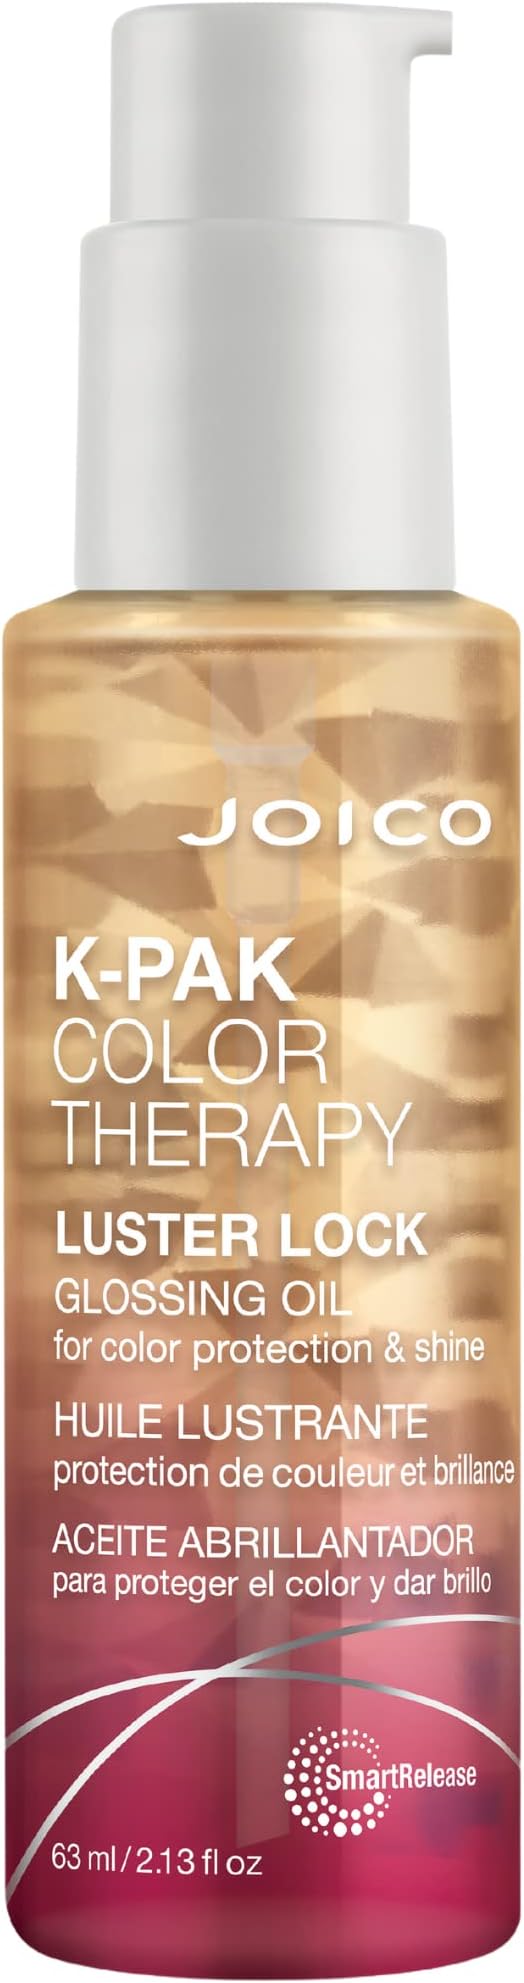 Joico K-PAK Color Therapy Luster Lock Glossing Oil for Unisex 2.13 oz Oil, 61 Count (Pack of 1), I0116059